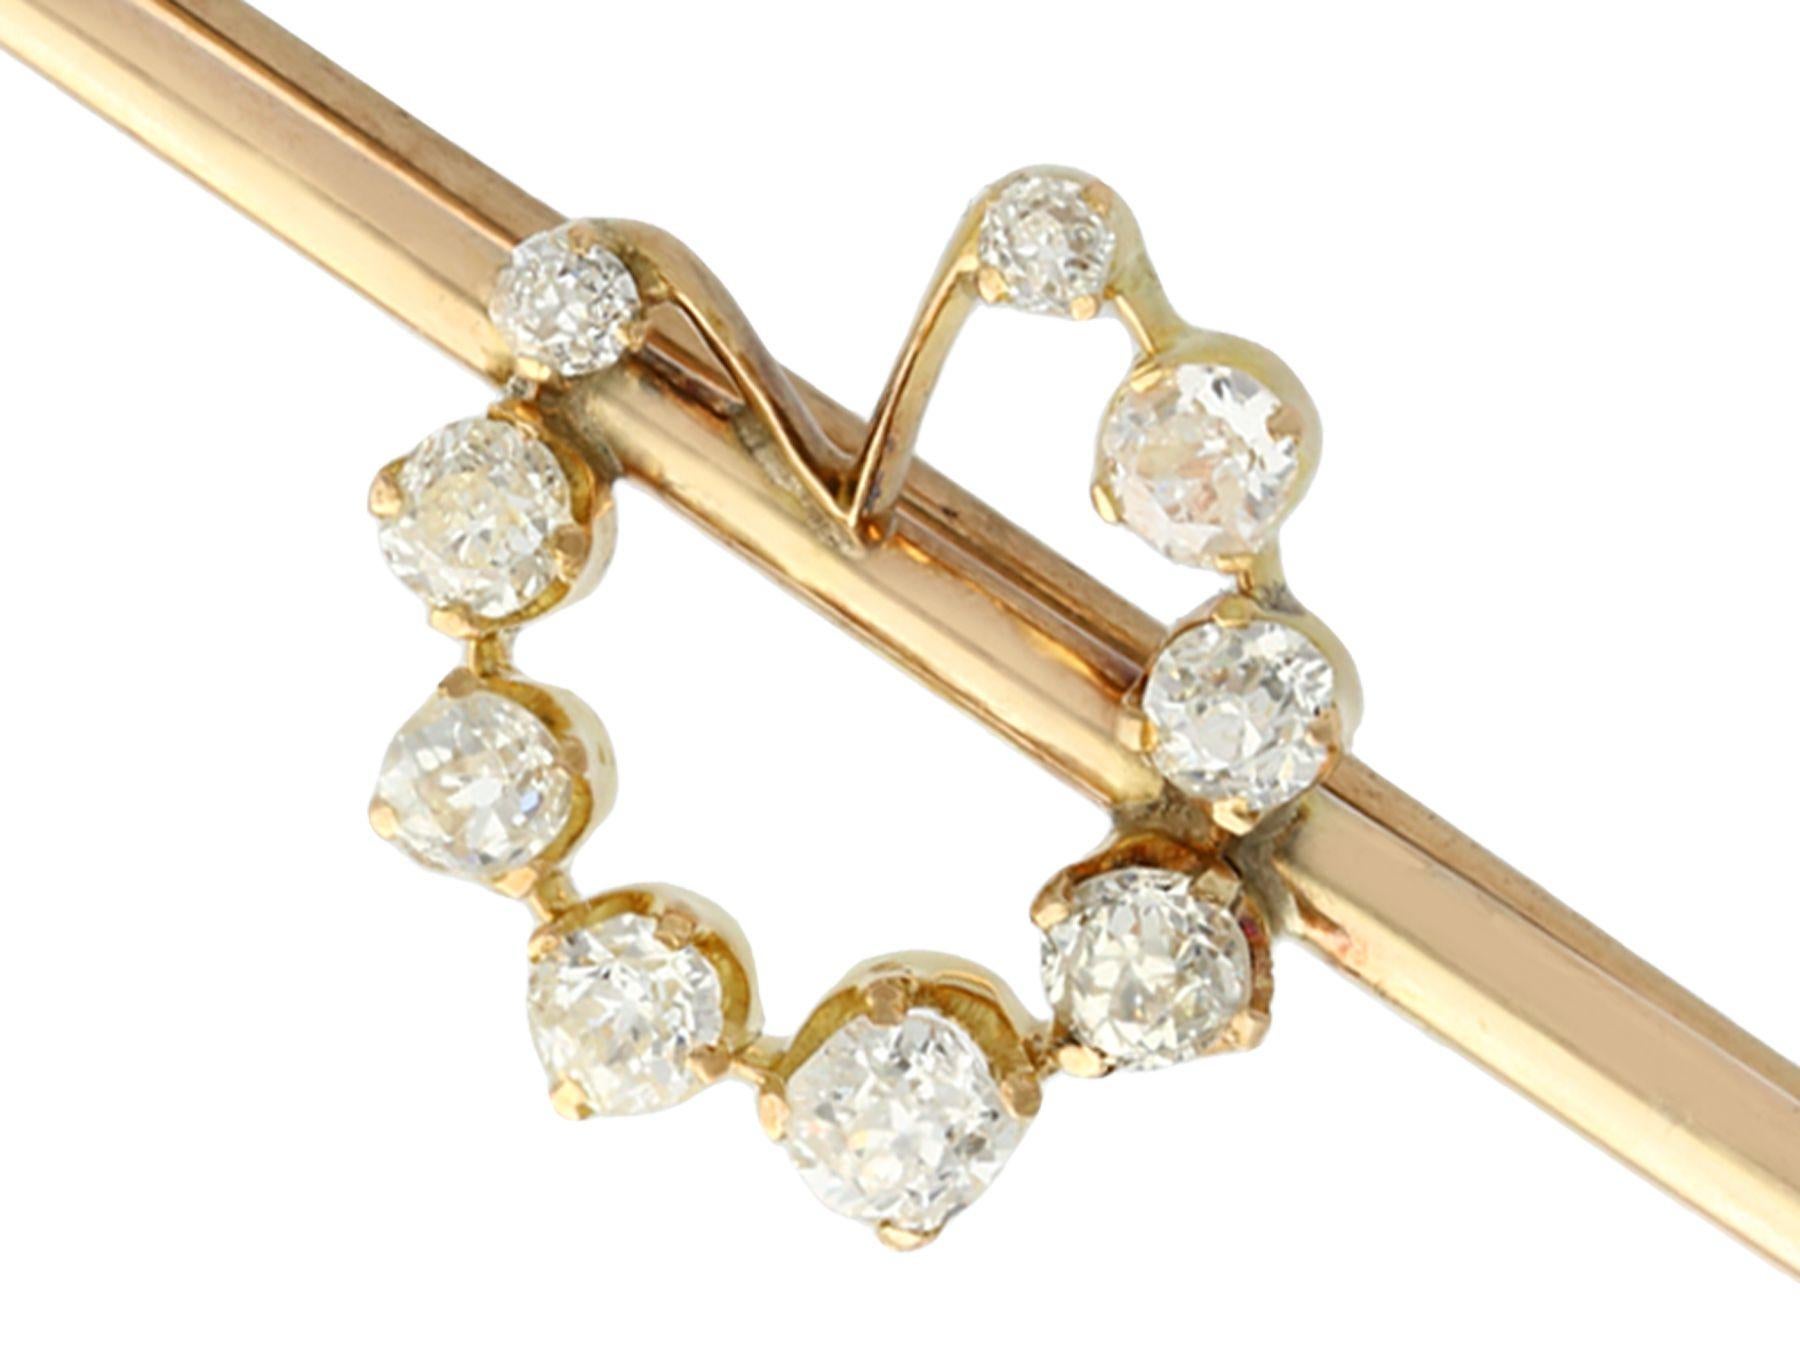 An exceptional antique 1.02 carat diamond and 12k yellow gold and silver set pin brooch; part of our diverse antique estate jewelry collections.

This exceptional, fine and impressive antique pin brooch has been crafted in 12k yellow gold and